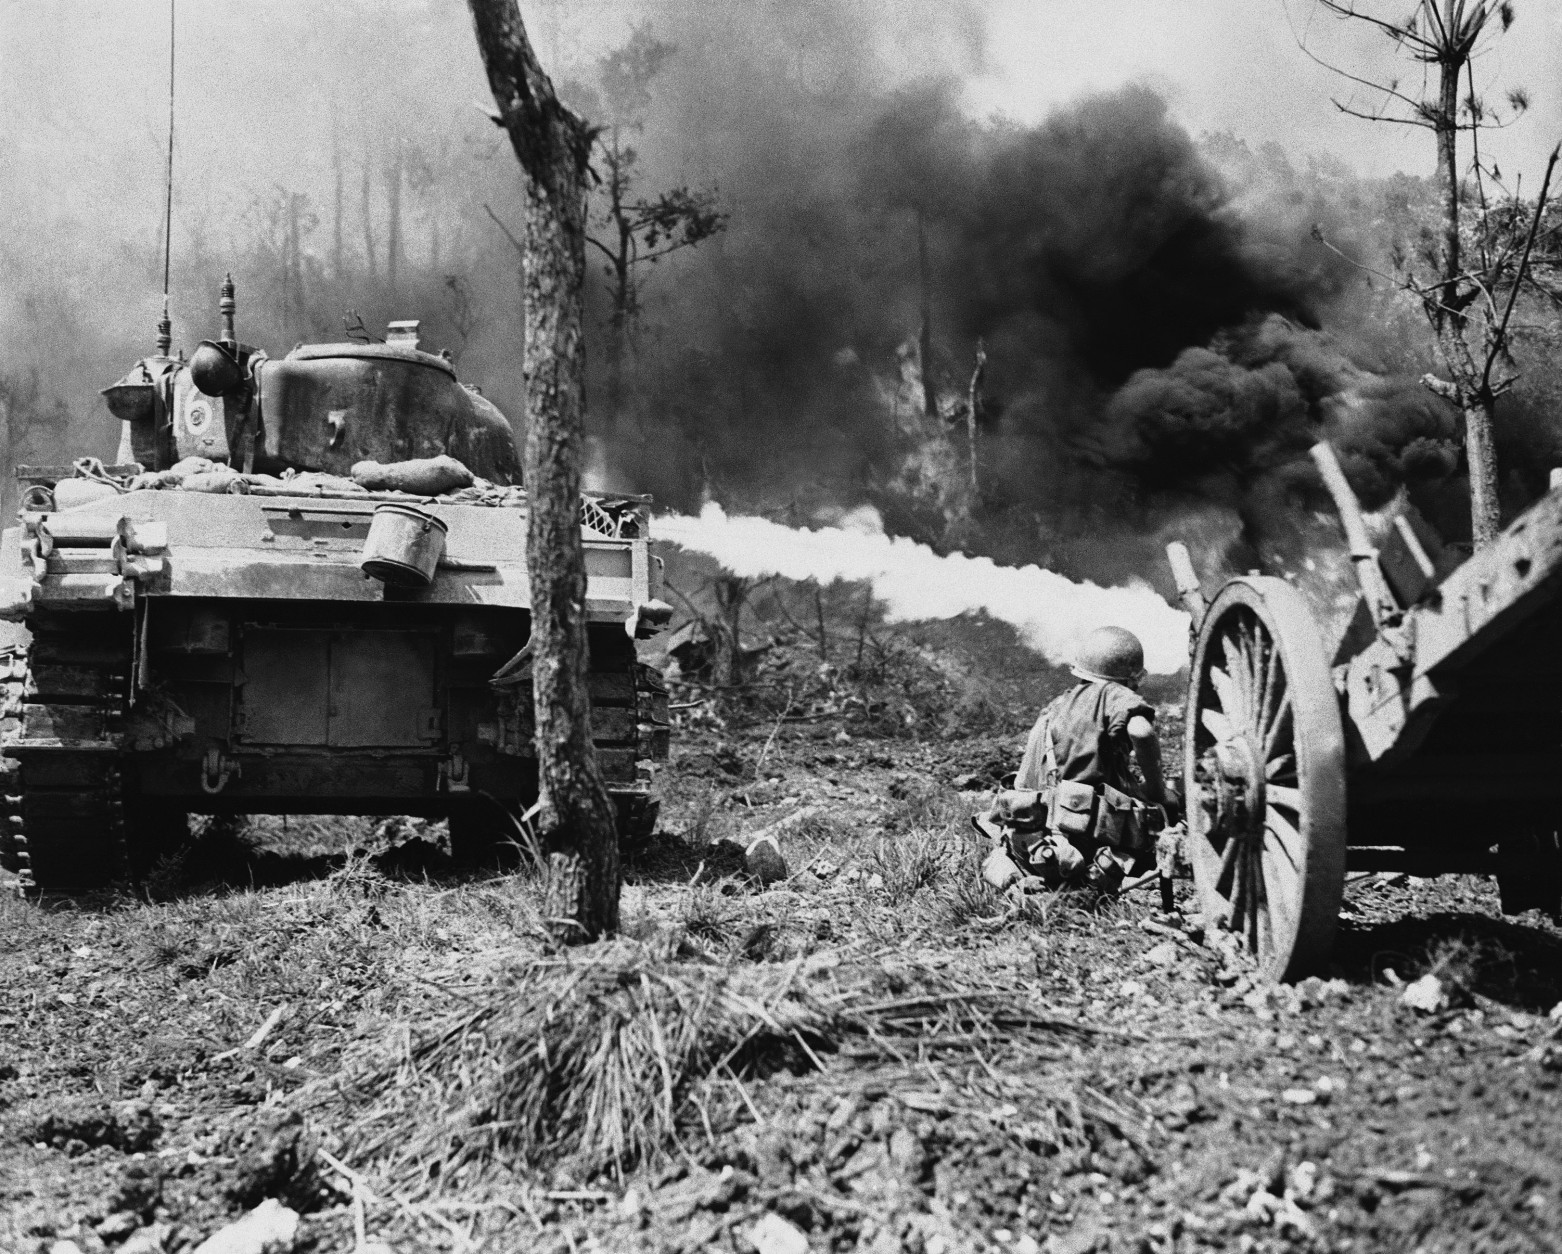 A flame-throwing tank of the U.S. Tenth Army on Okinawa, Japan moves up close to a Japanese position to destroy it with flames during the terrific fighting on the island in the spring of 1945. An infantryman of the 96th Infantry Division crouches, ready to get any of the enemy who might have avoided the flames. (AP Photo)